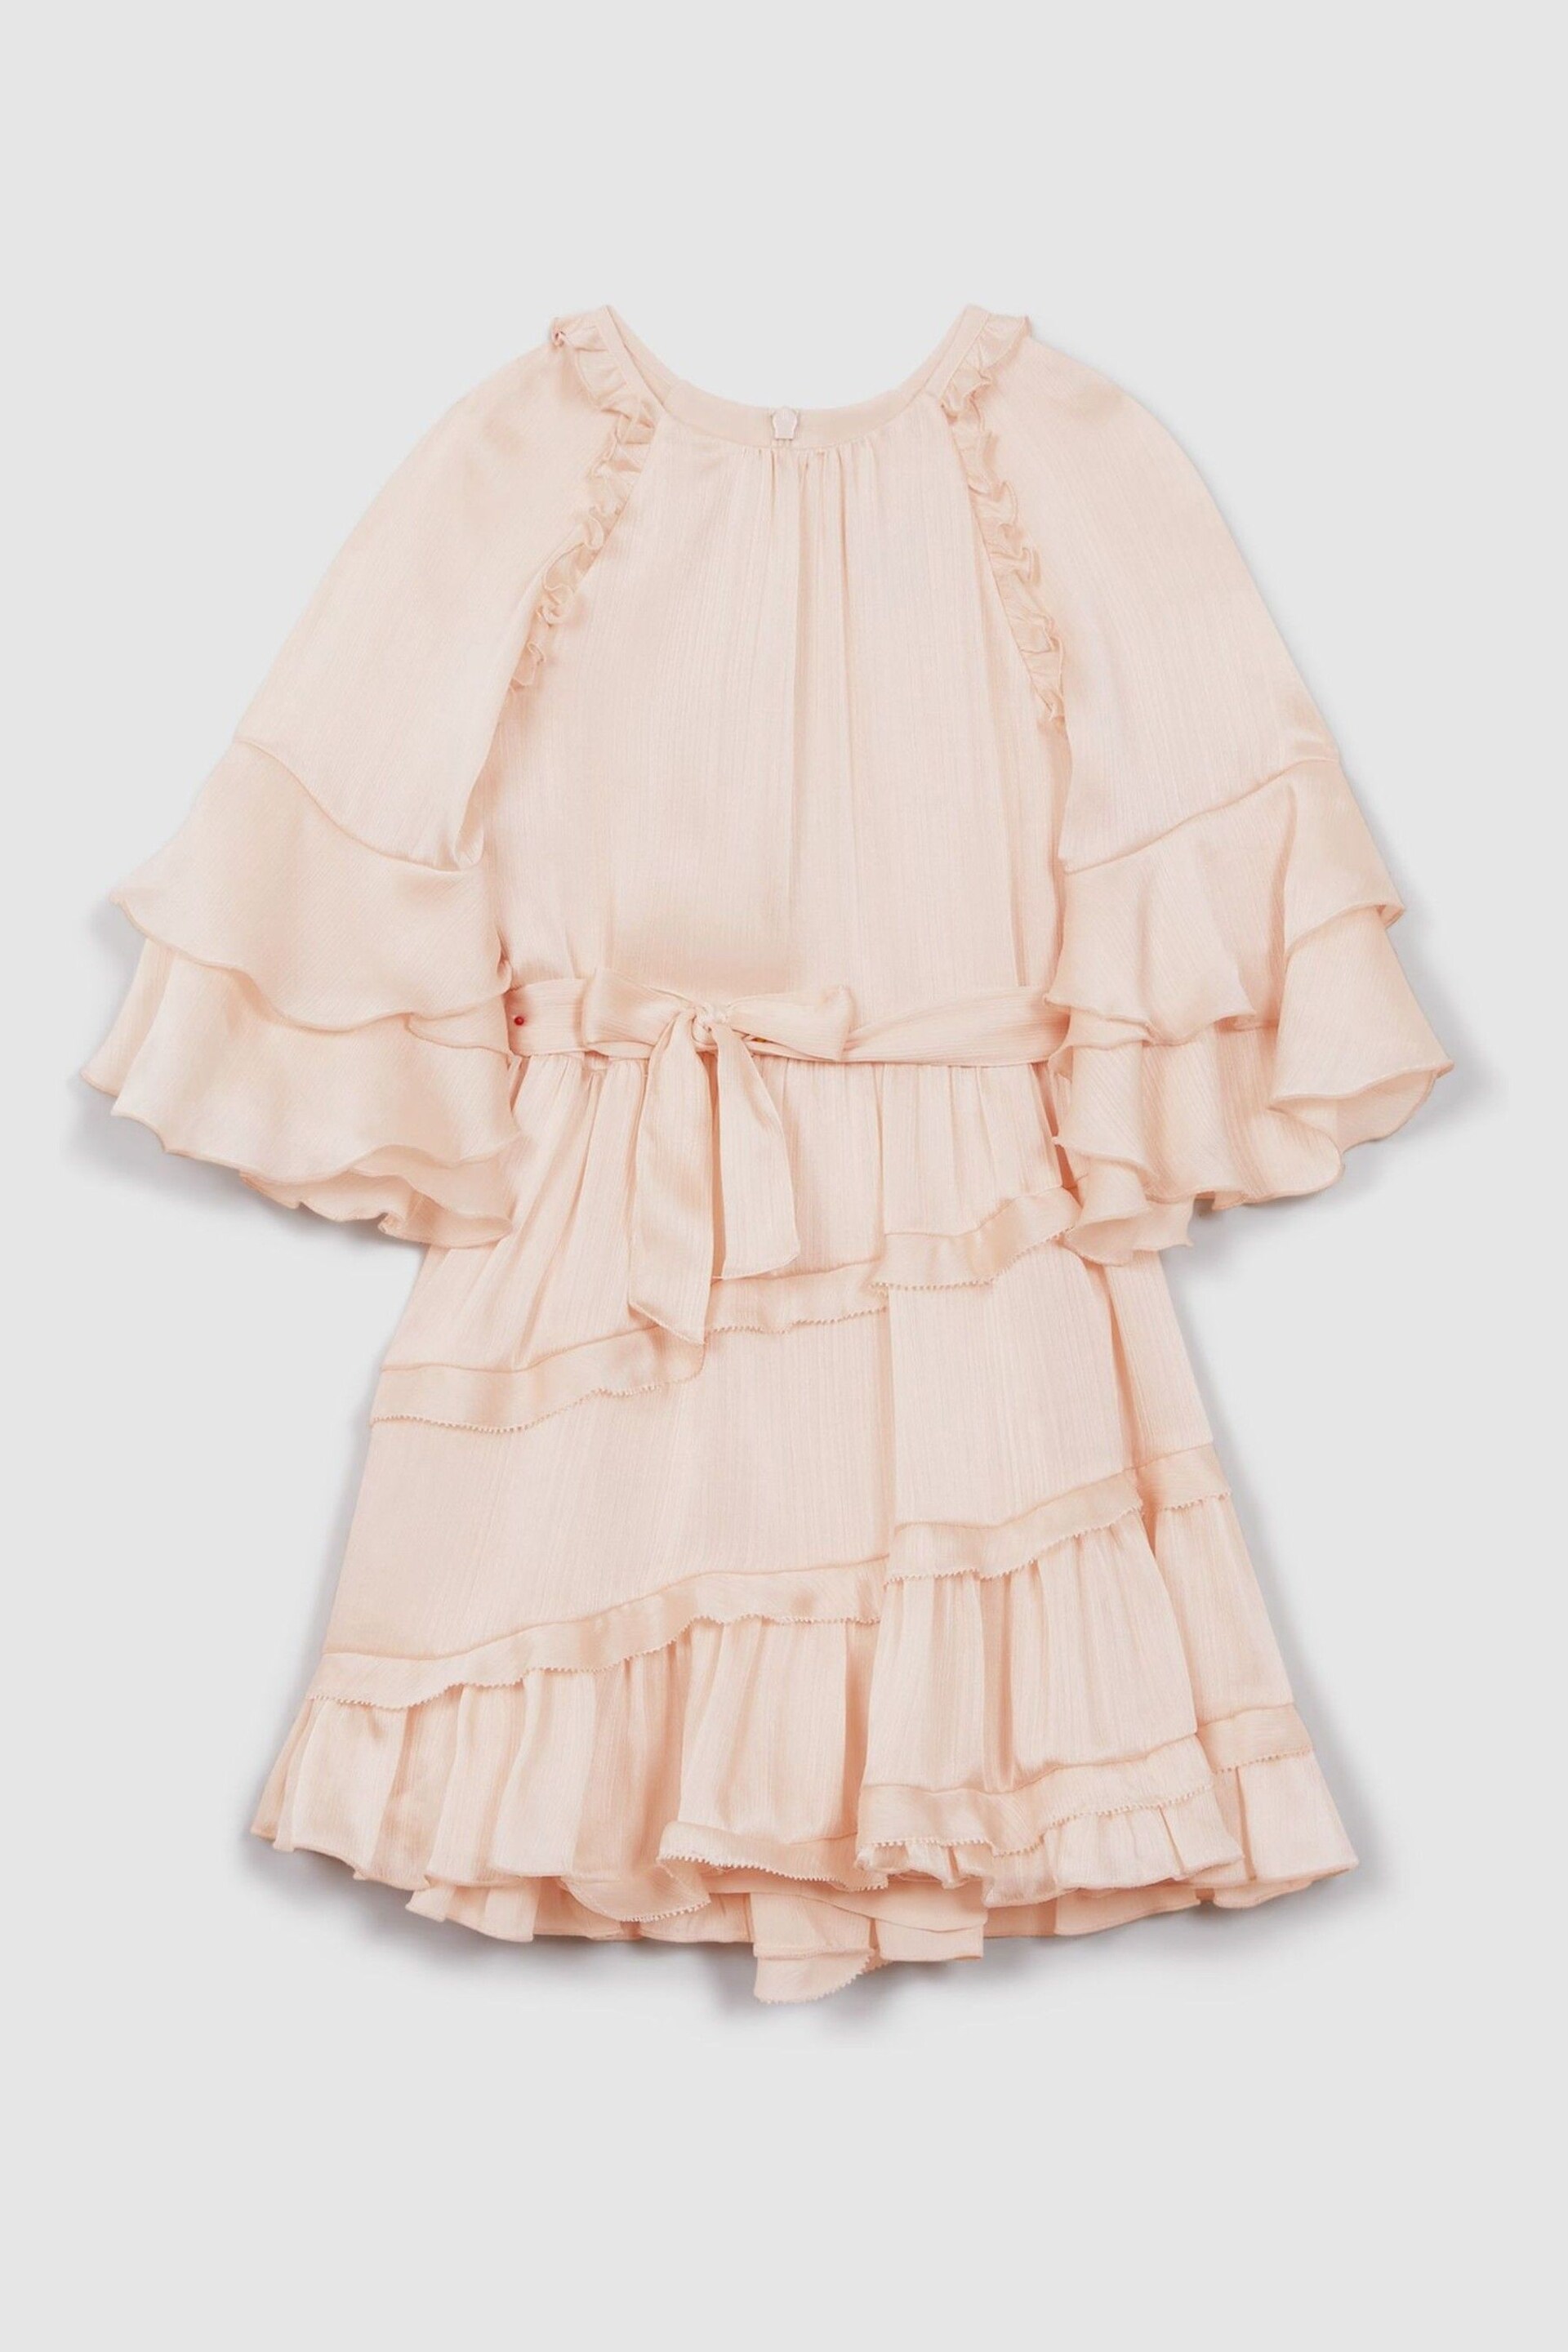 Reiss Pink Polly Senior Textured Satin Frilly Dress - Image 2 of 7